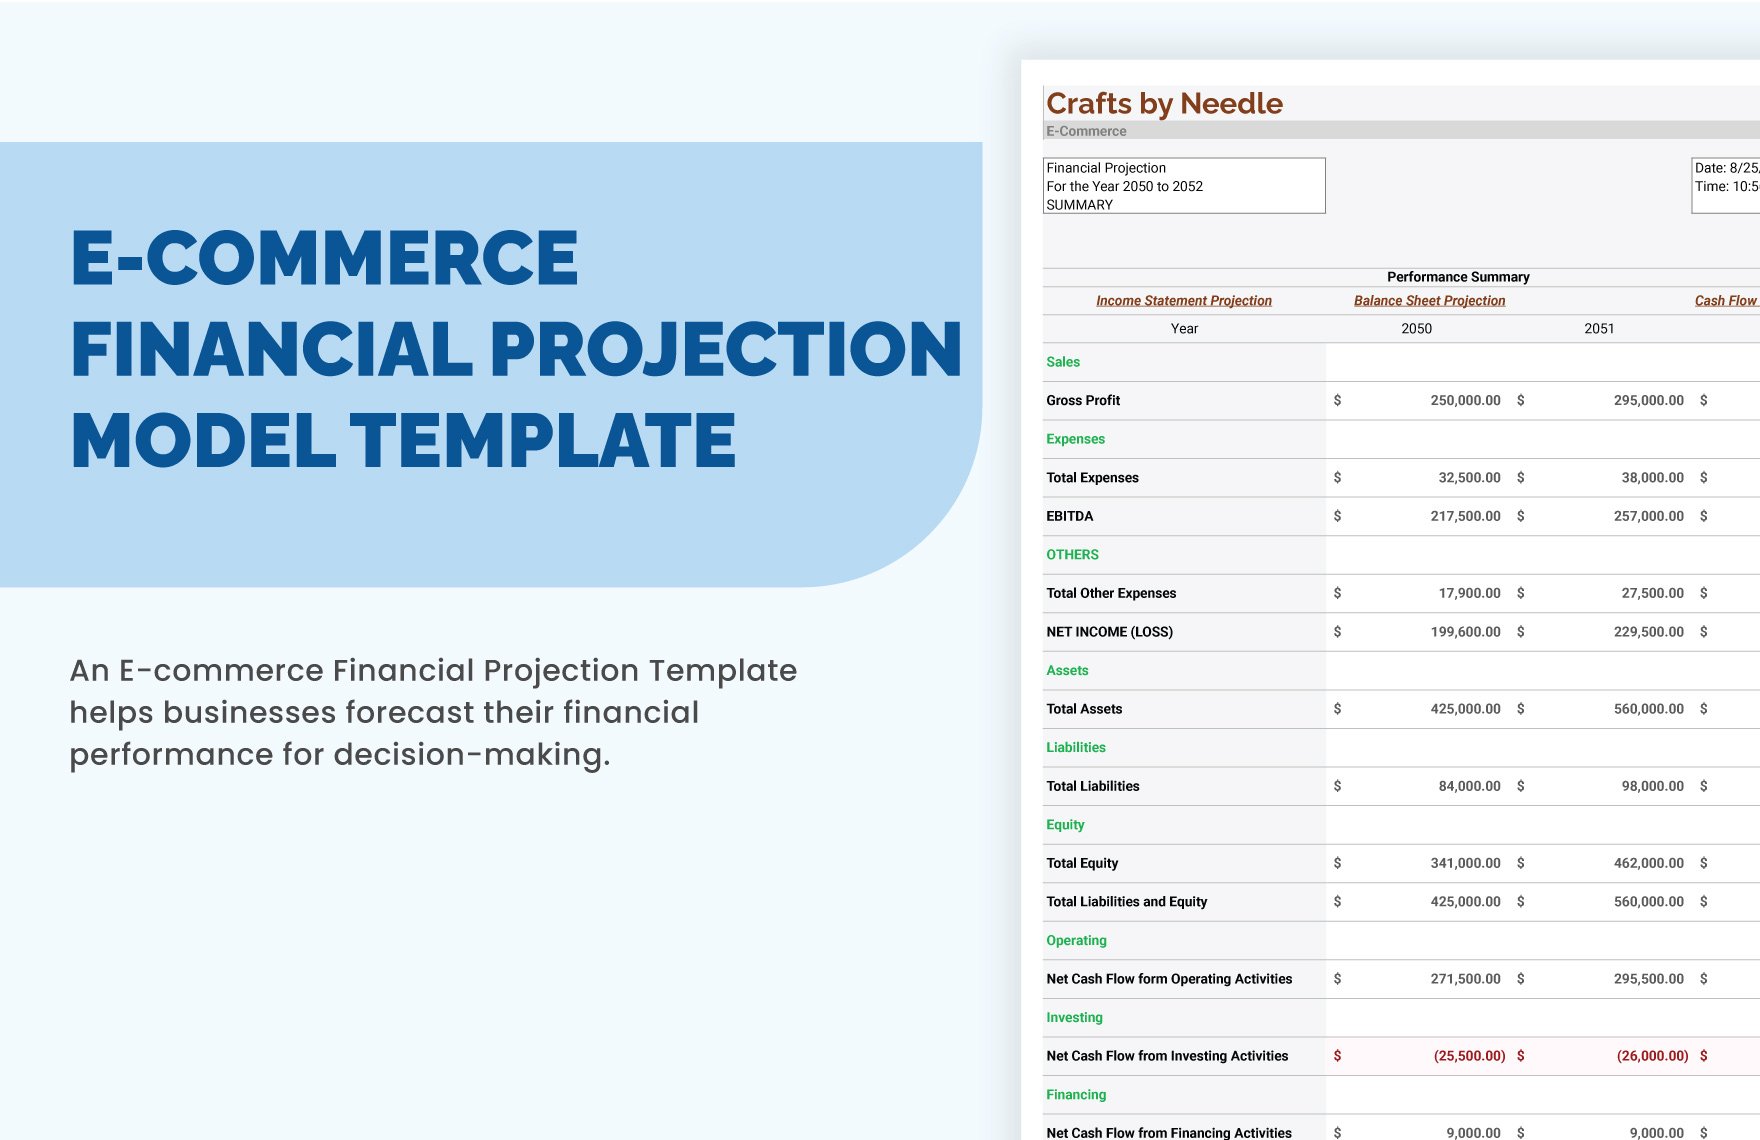 E-commerce Financial Projection Model Template